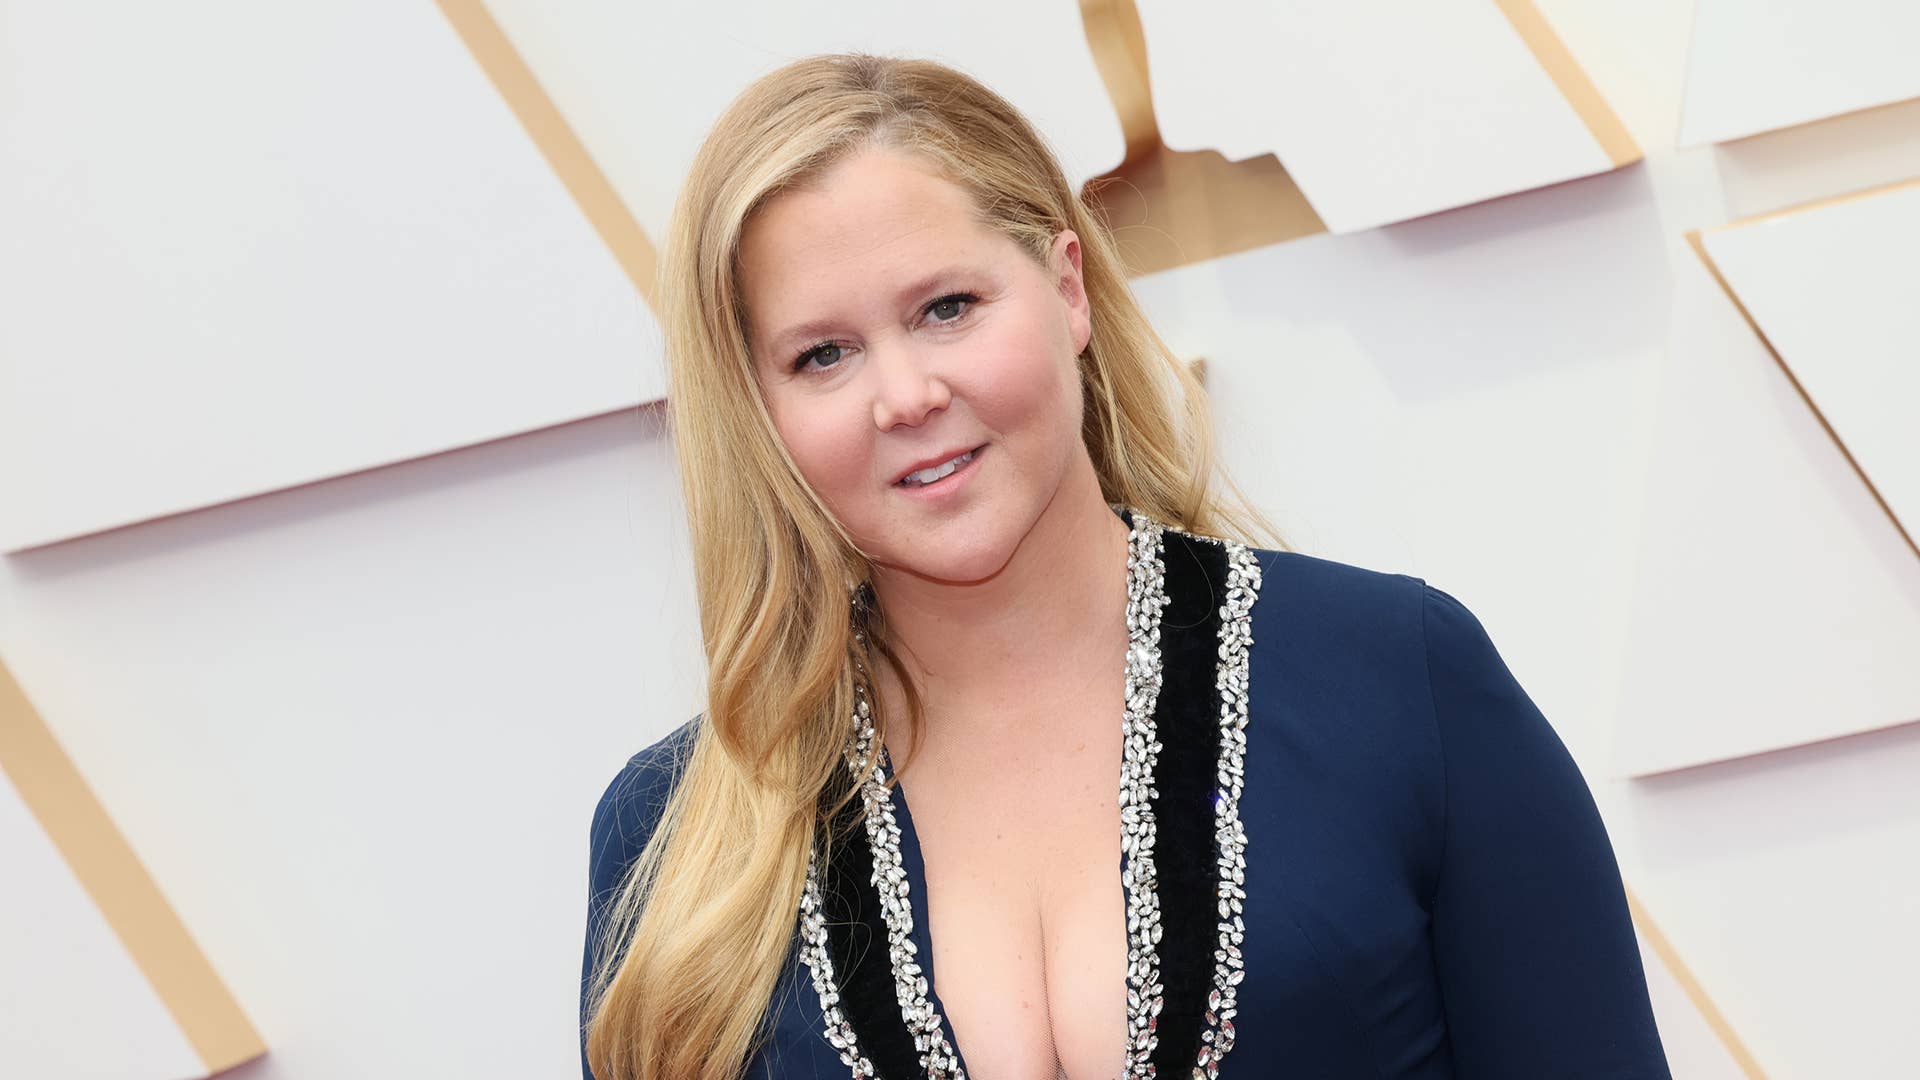 Amy Schumer attends the 94th Annual Academy Awards at Hollywood and Highland